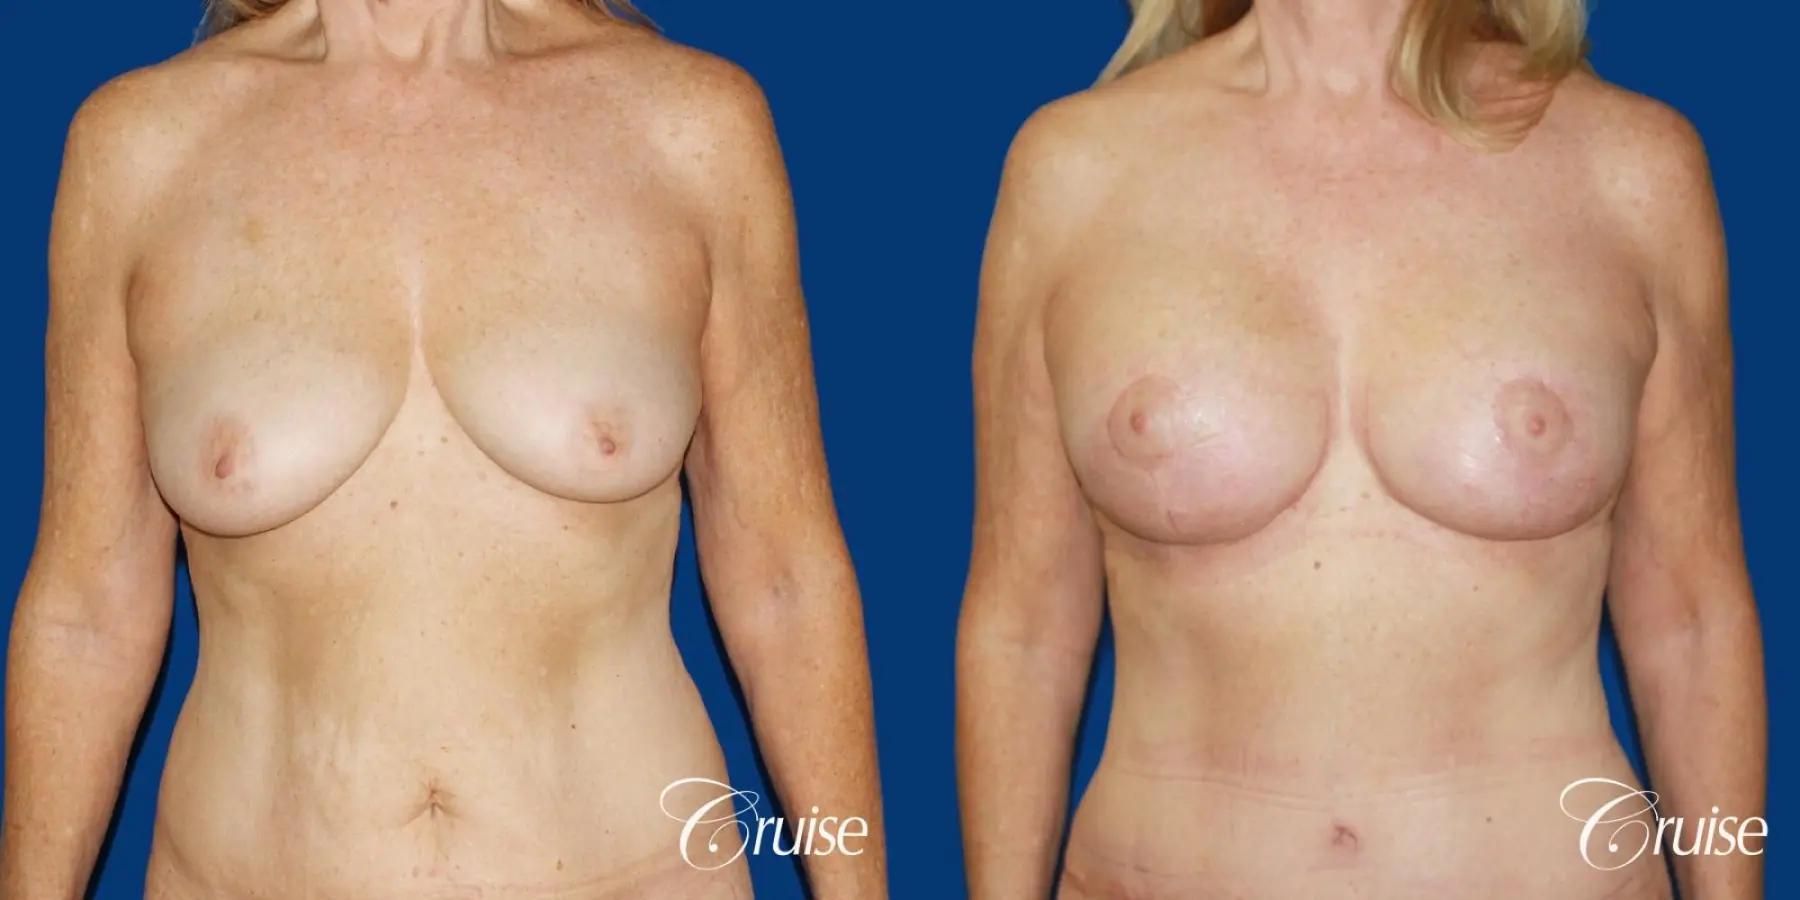 62 yr old woman with breast lift anchor and silicone implants - Before and After 1